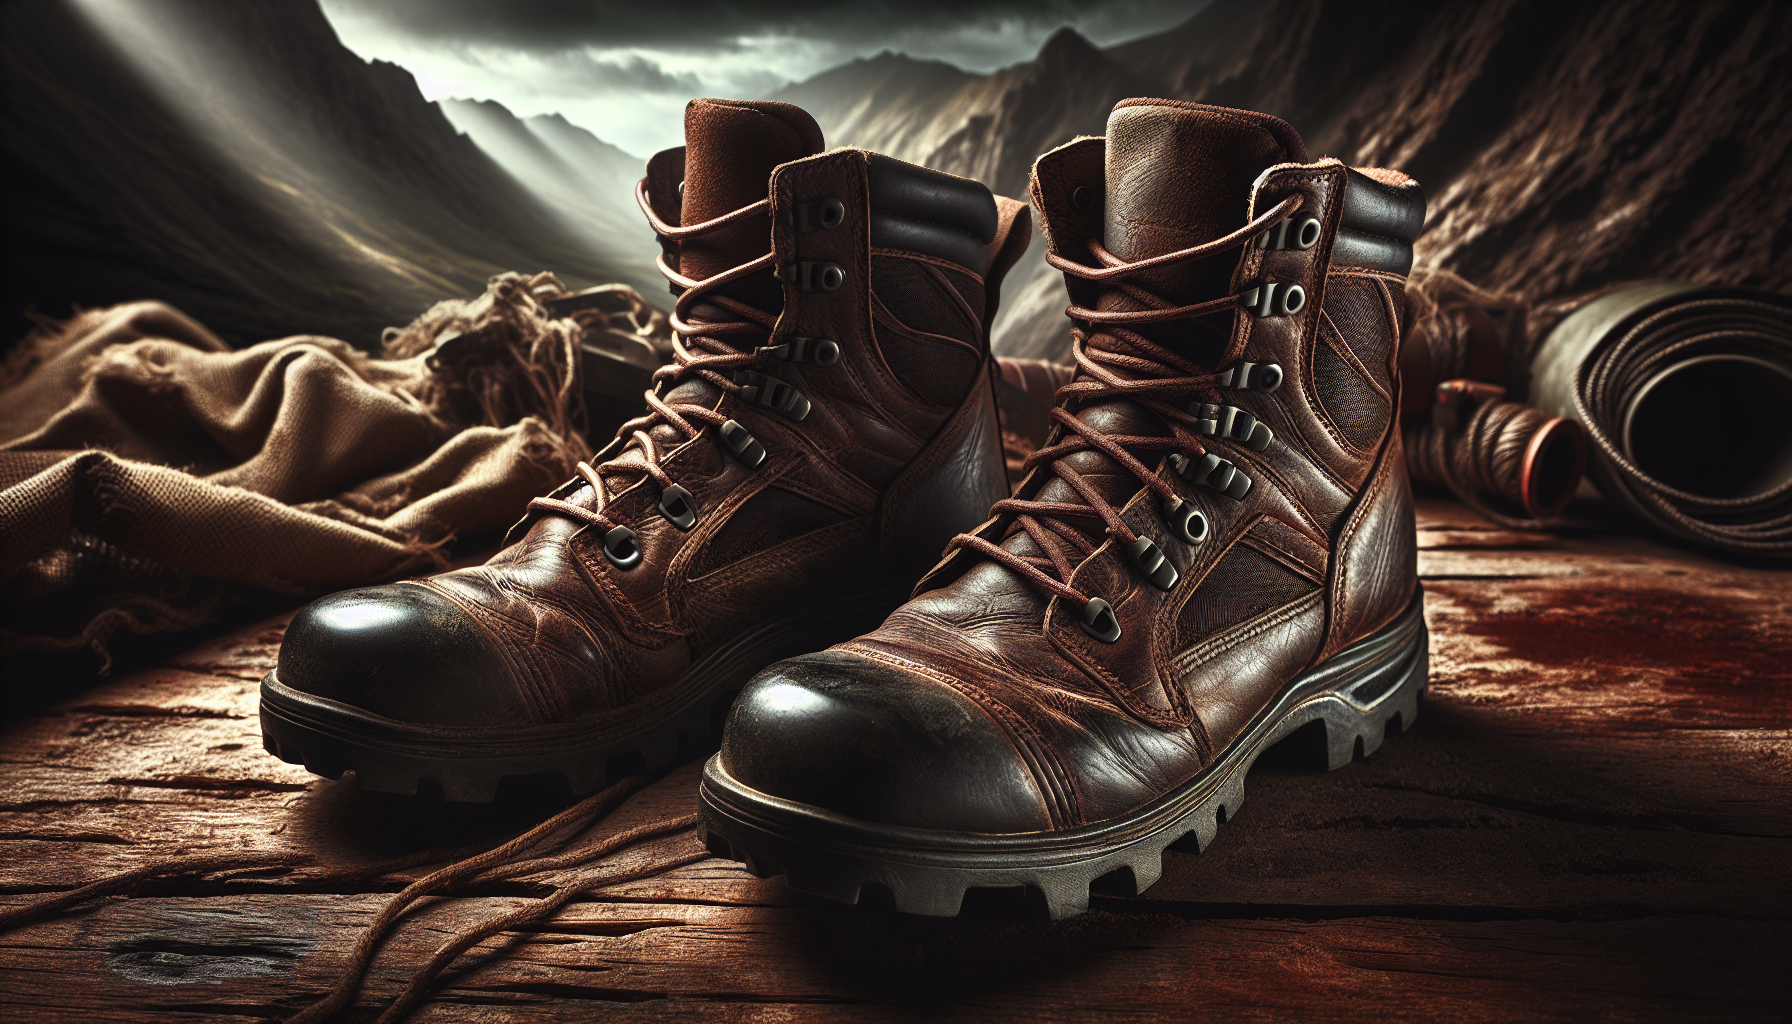 The Ultimate Guide To Maintaining And Caring For Your Tactical Boots